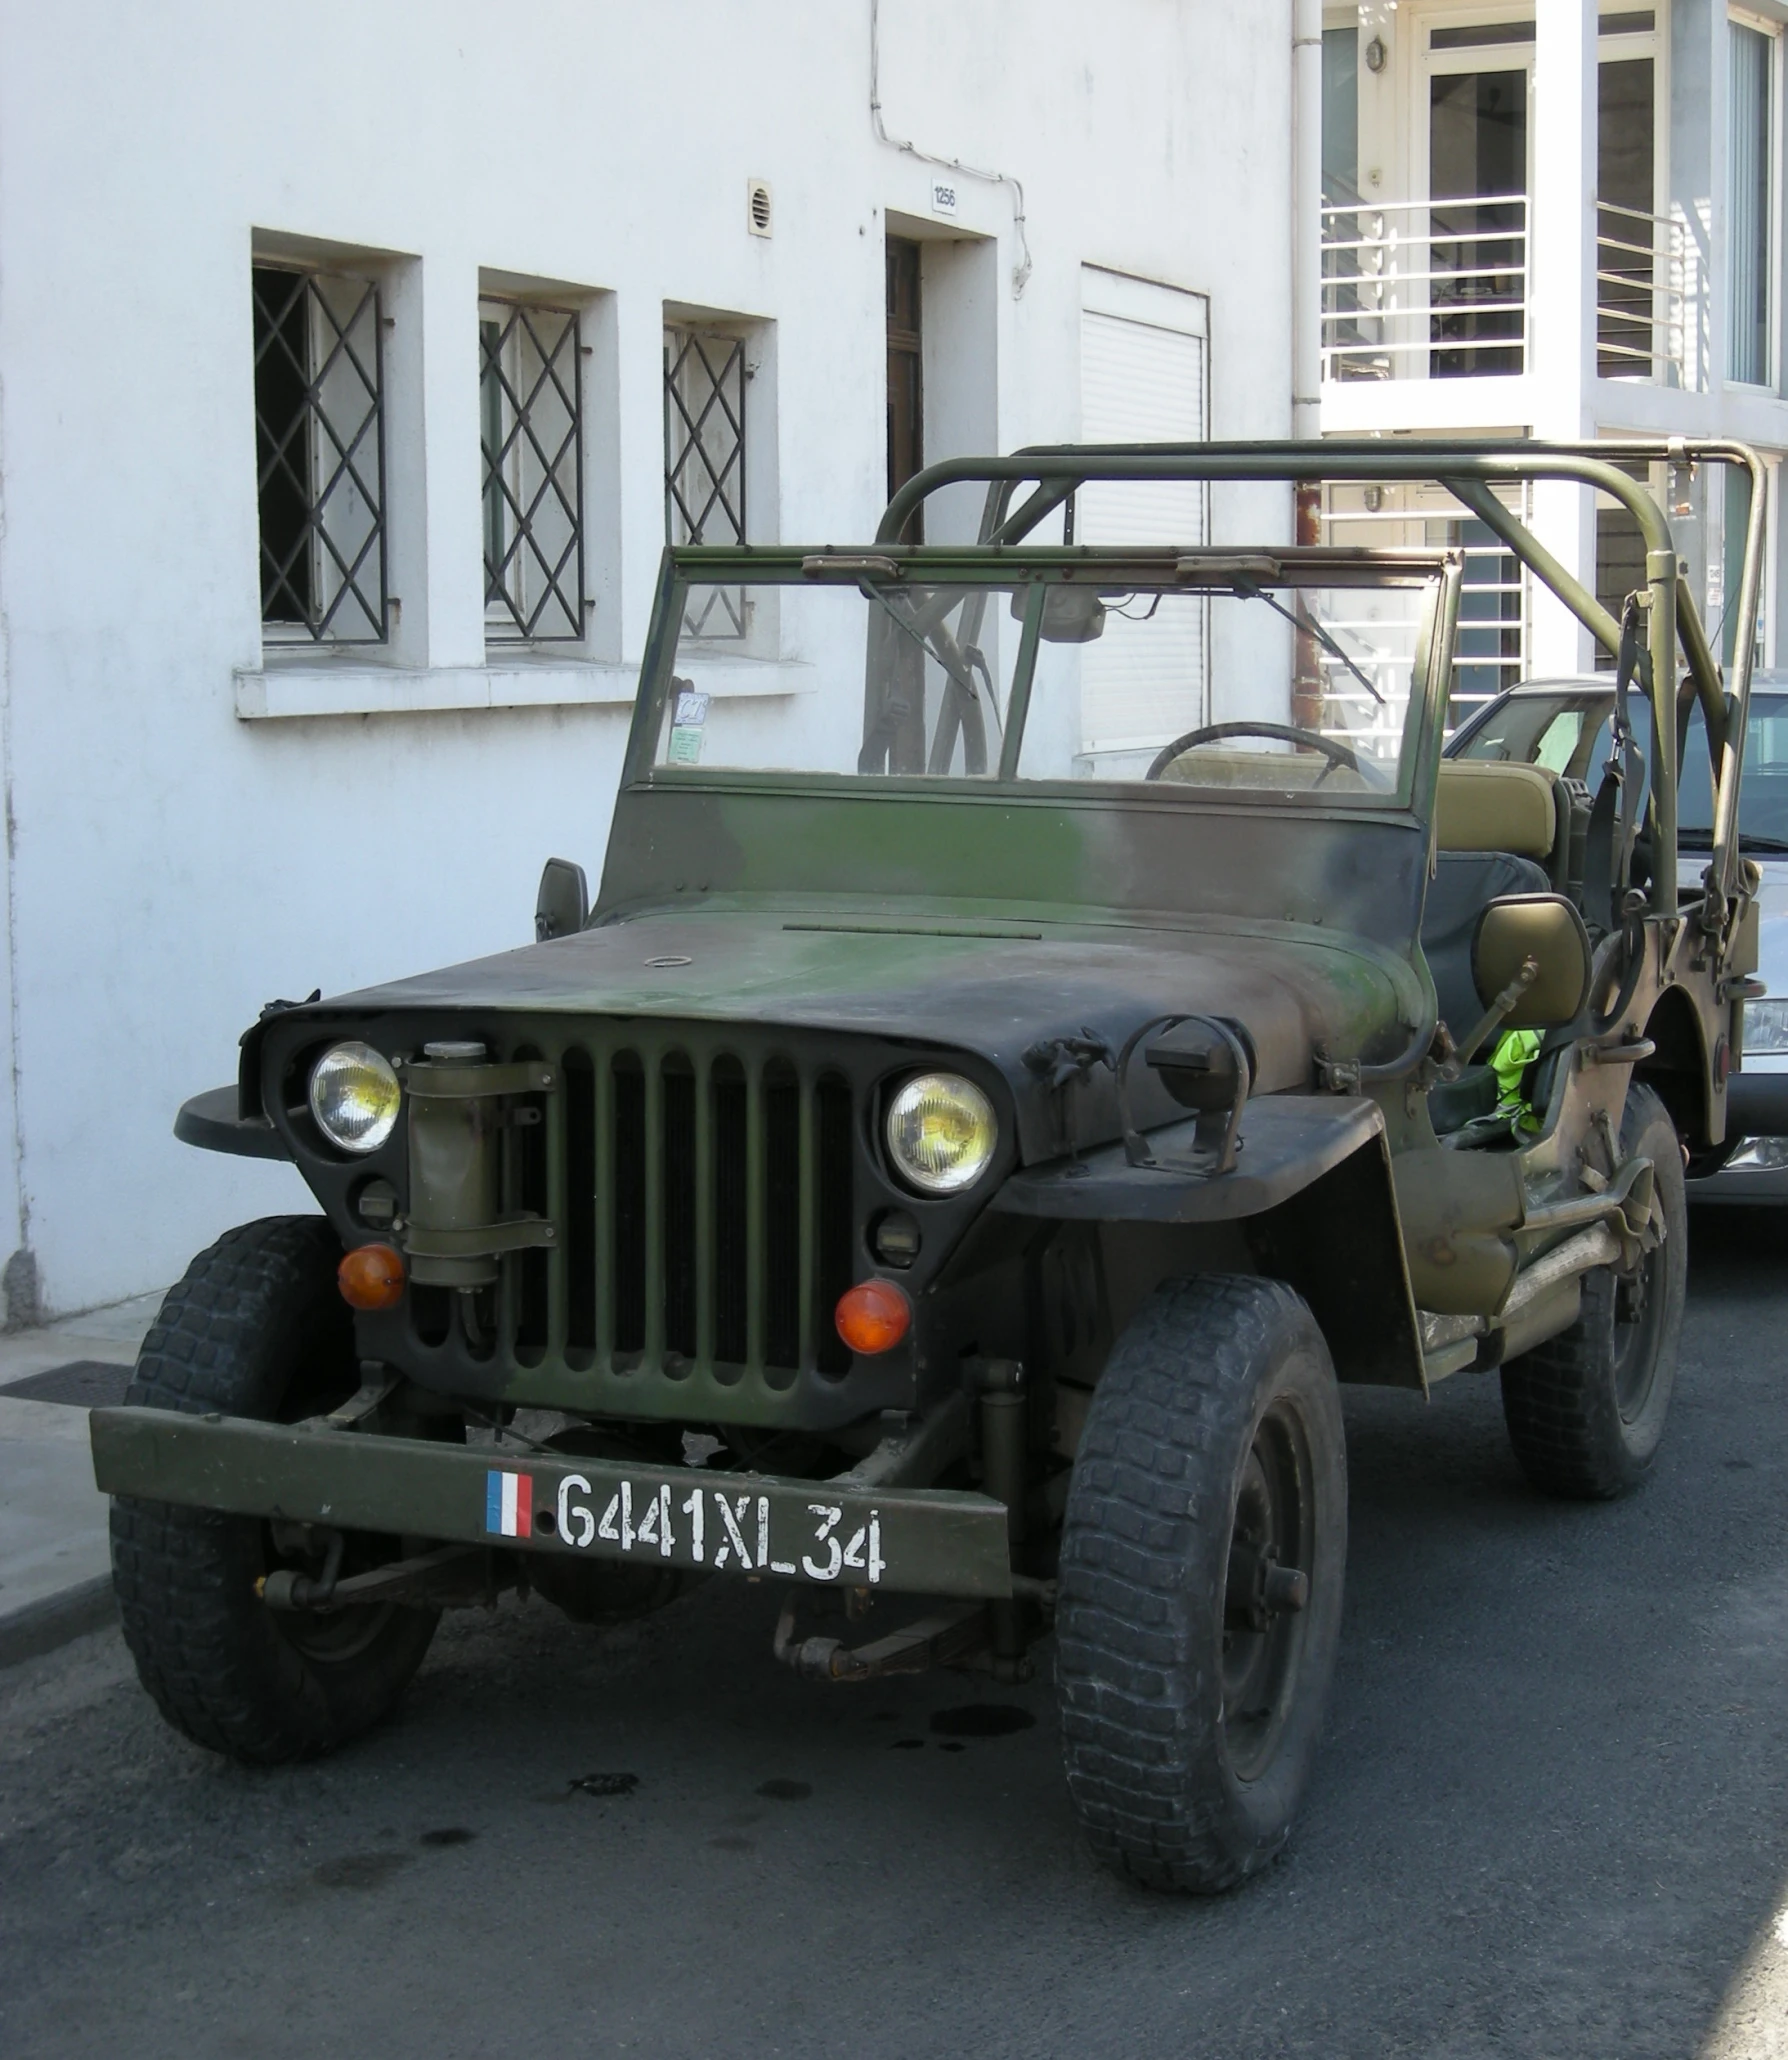 a military vehicle parked in front of a building